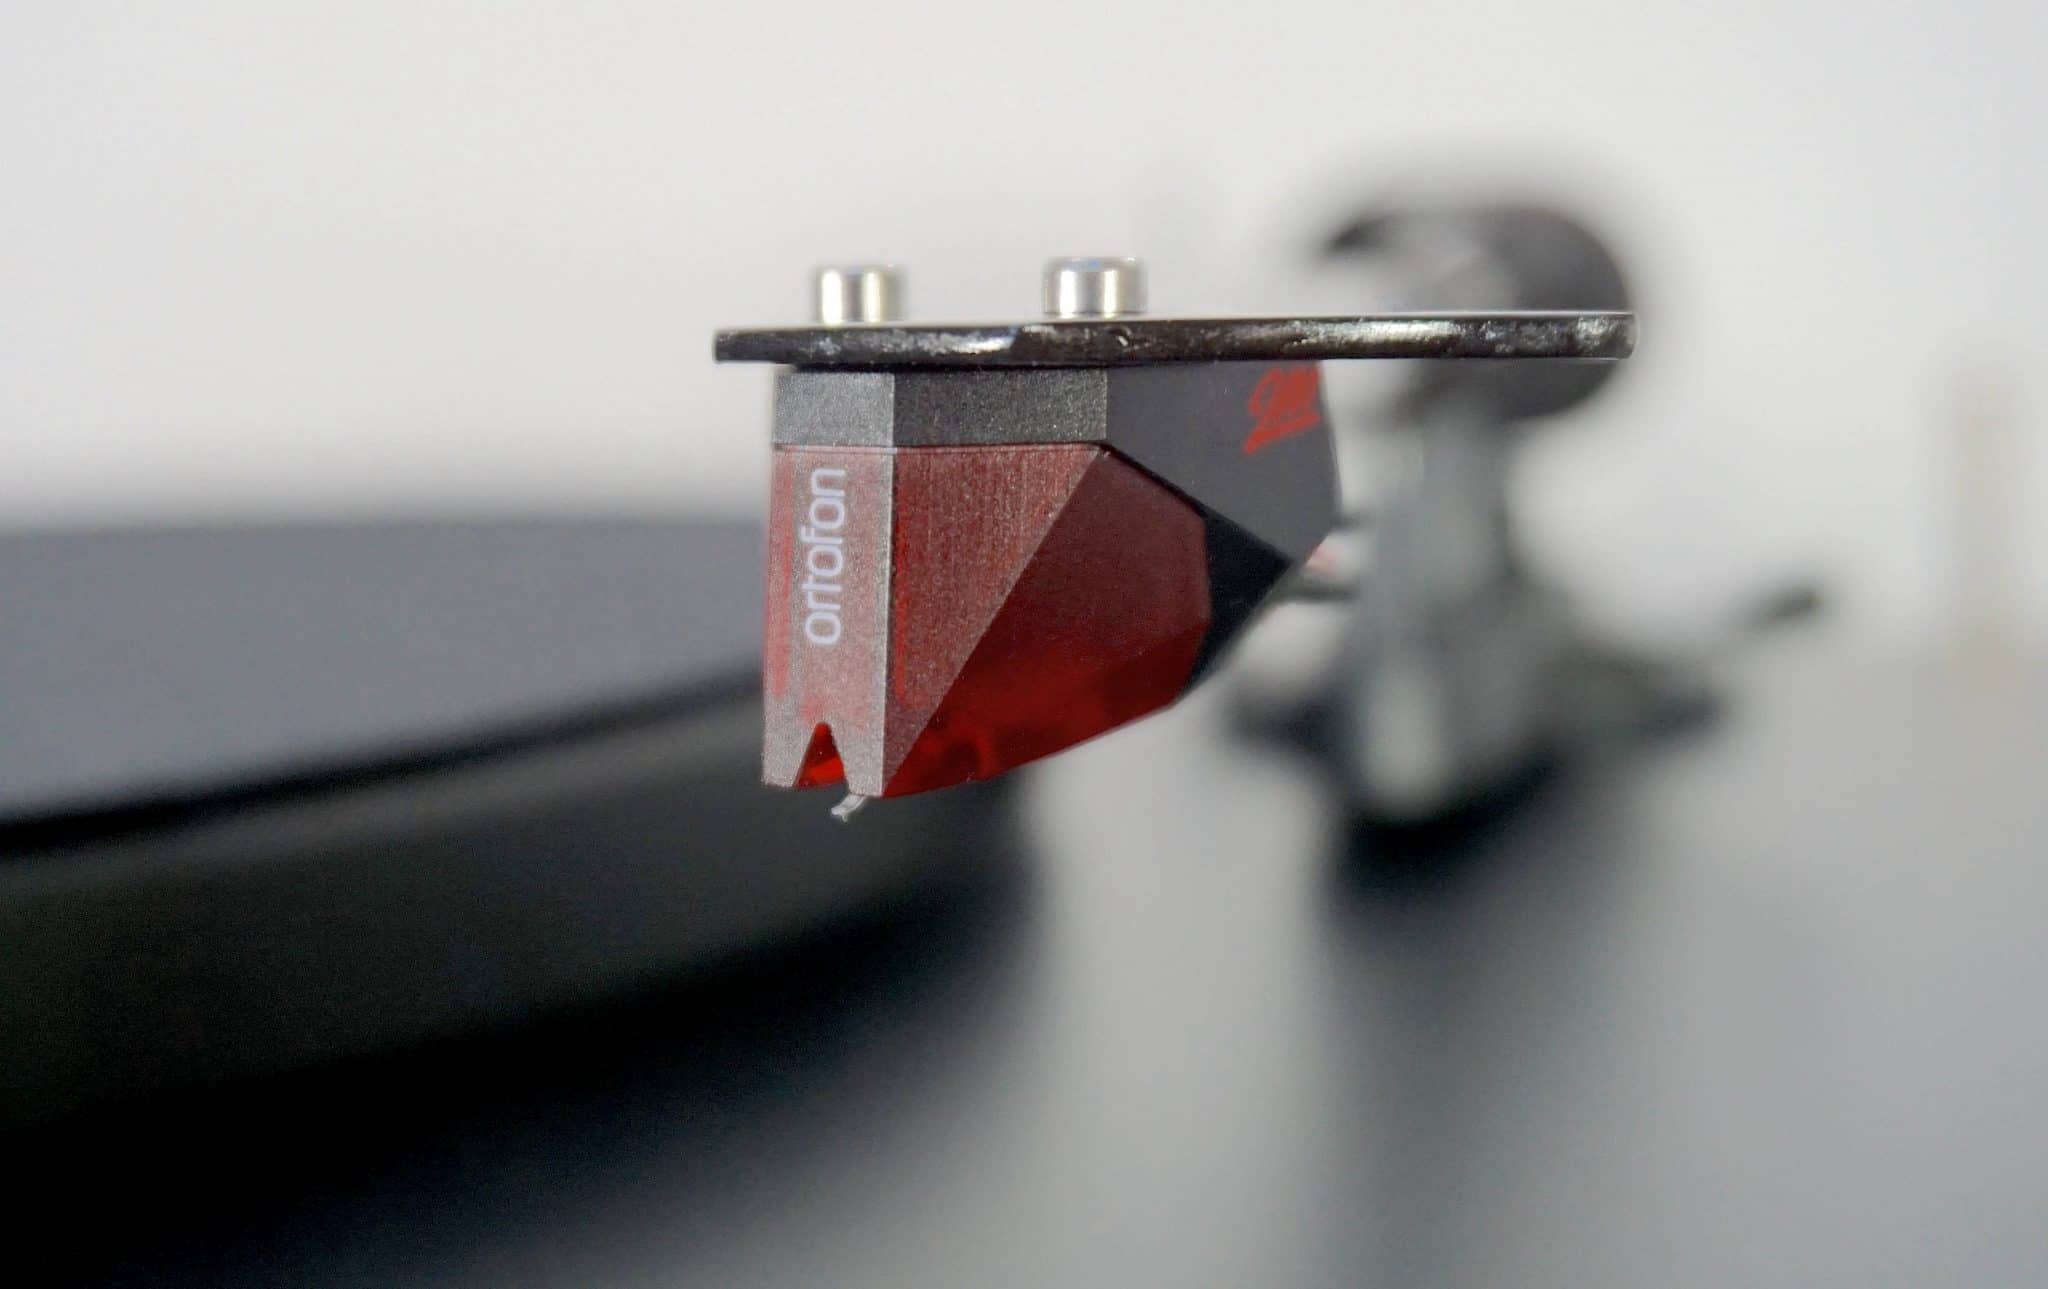 EVO Carbon Debut Turntable from Pro-Ject